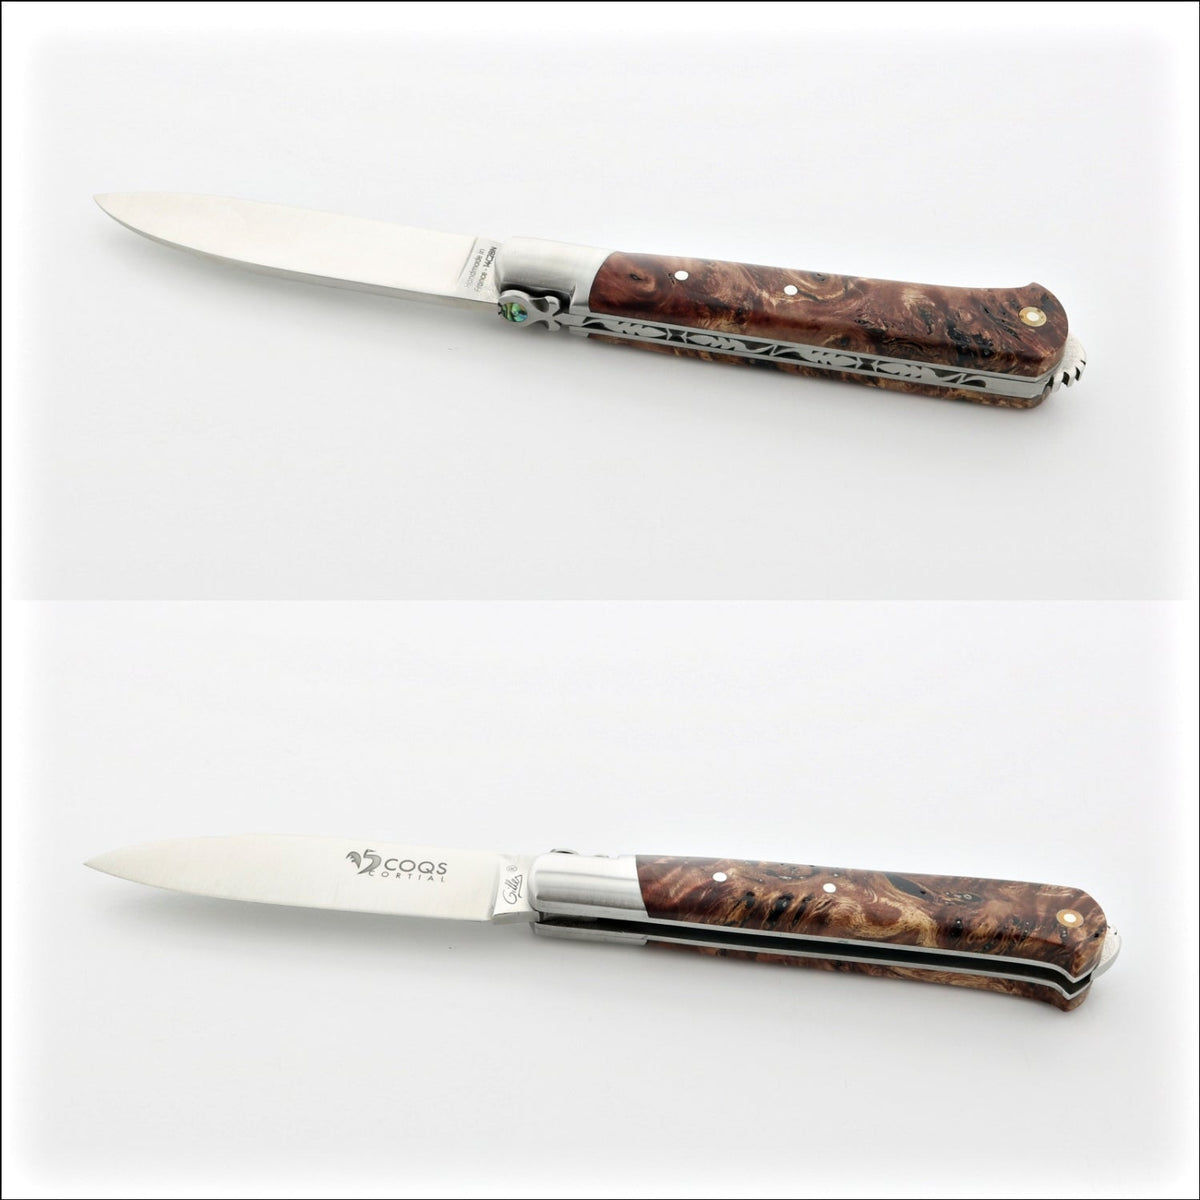 5 Coqs Pocket Knife - Maple Burl Handle &amp; Mother of Pearl Inlay